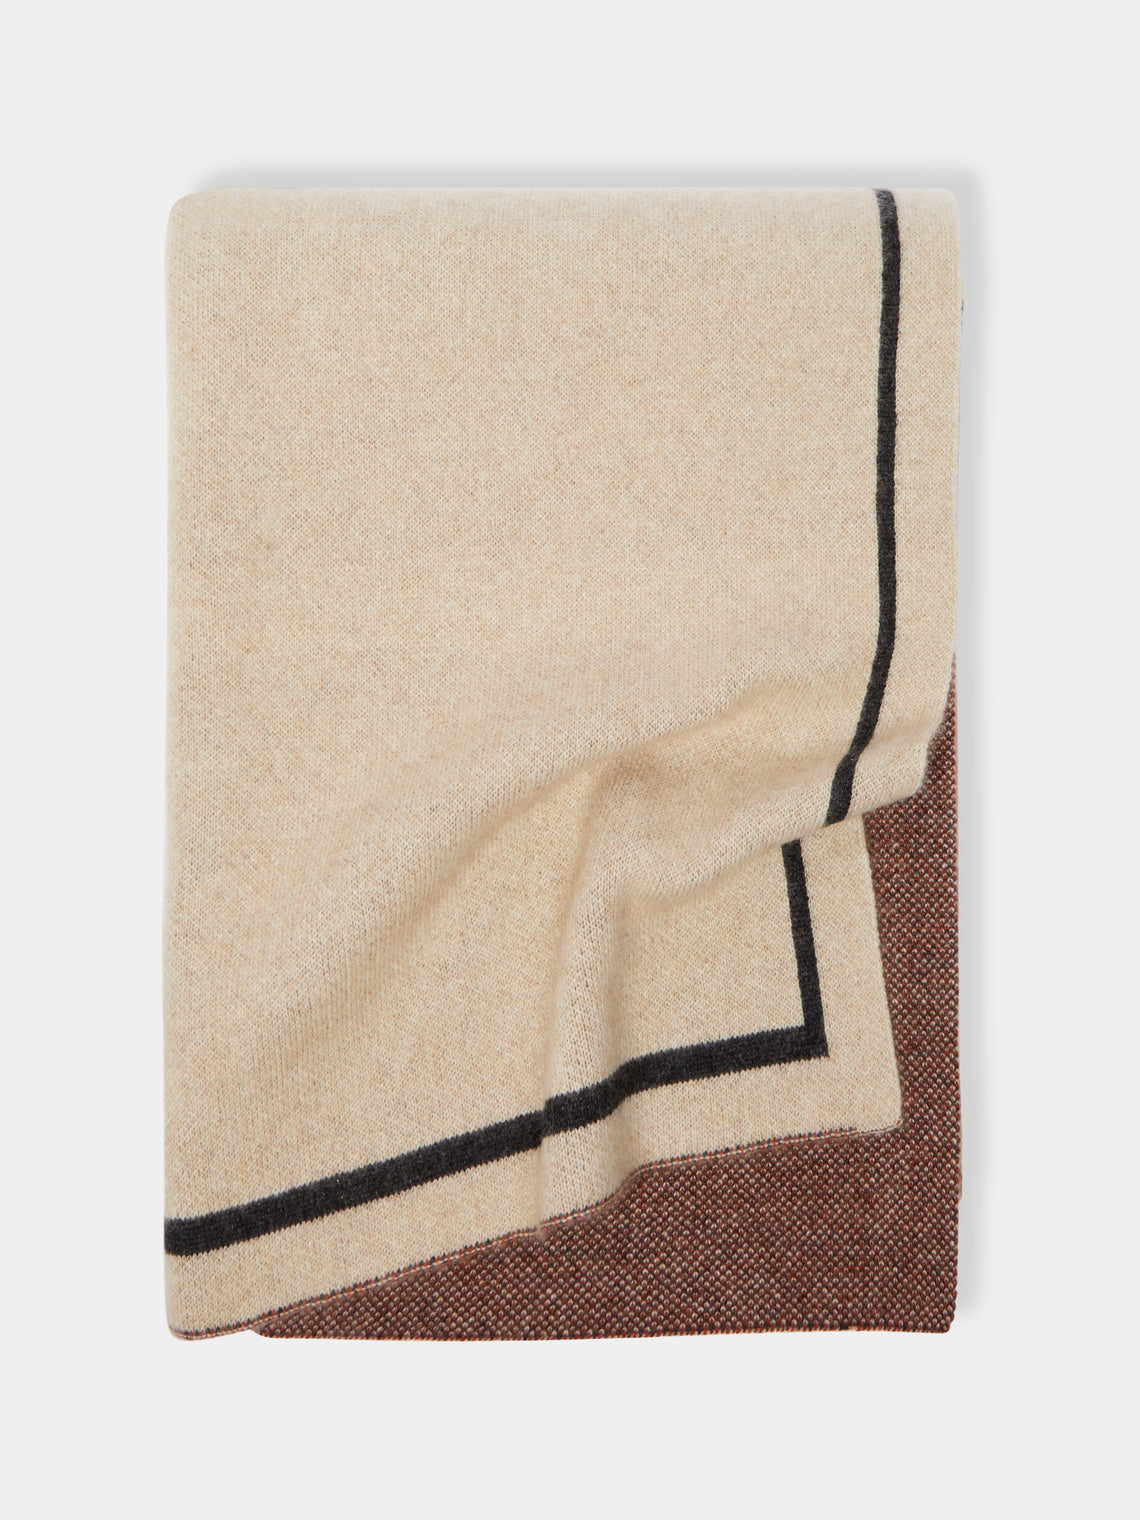 Saved NY - Serpents Apple Cashmere Blanket - Taupe - ABASK - 